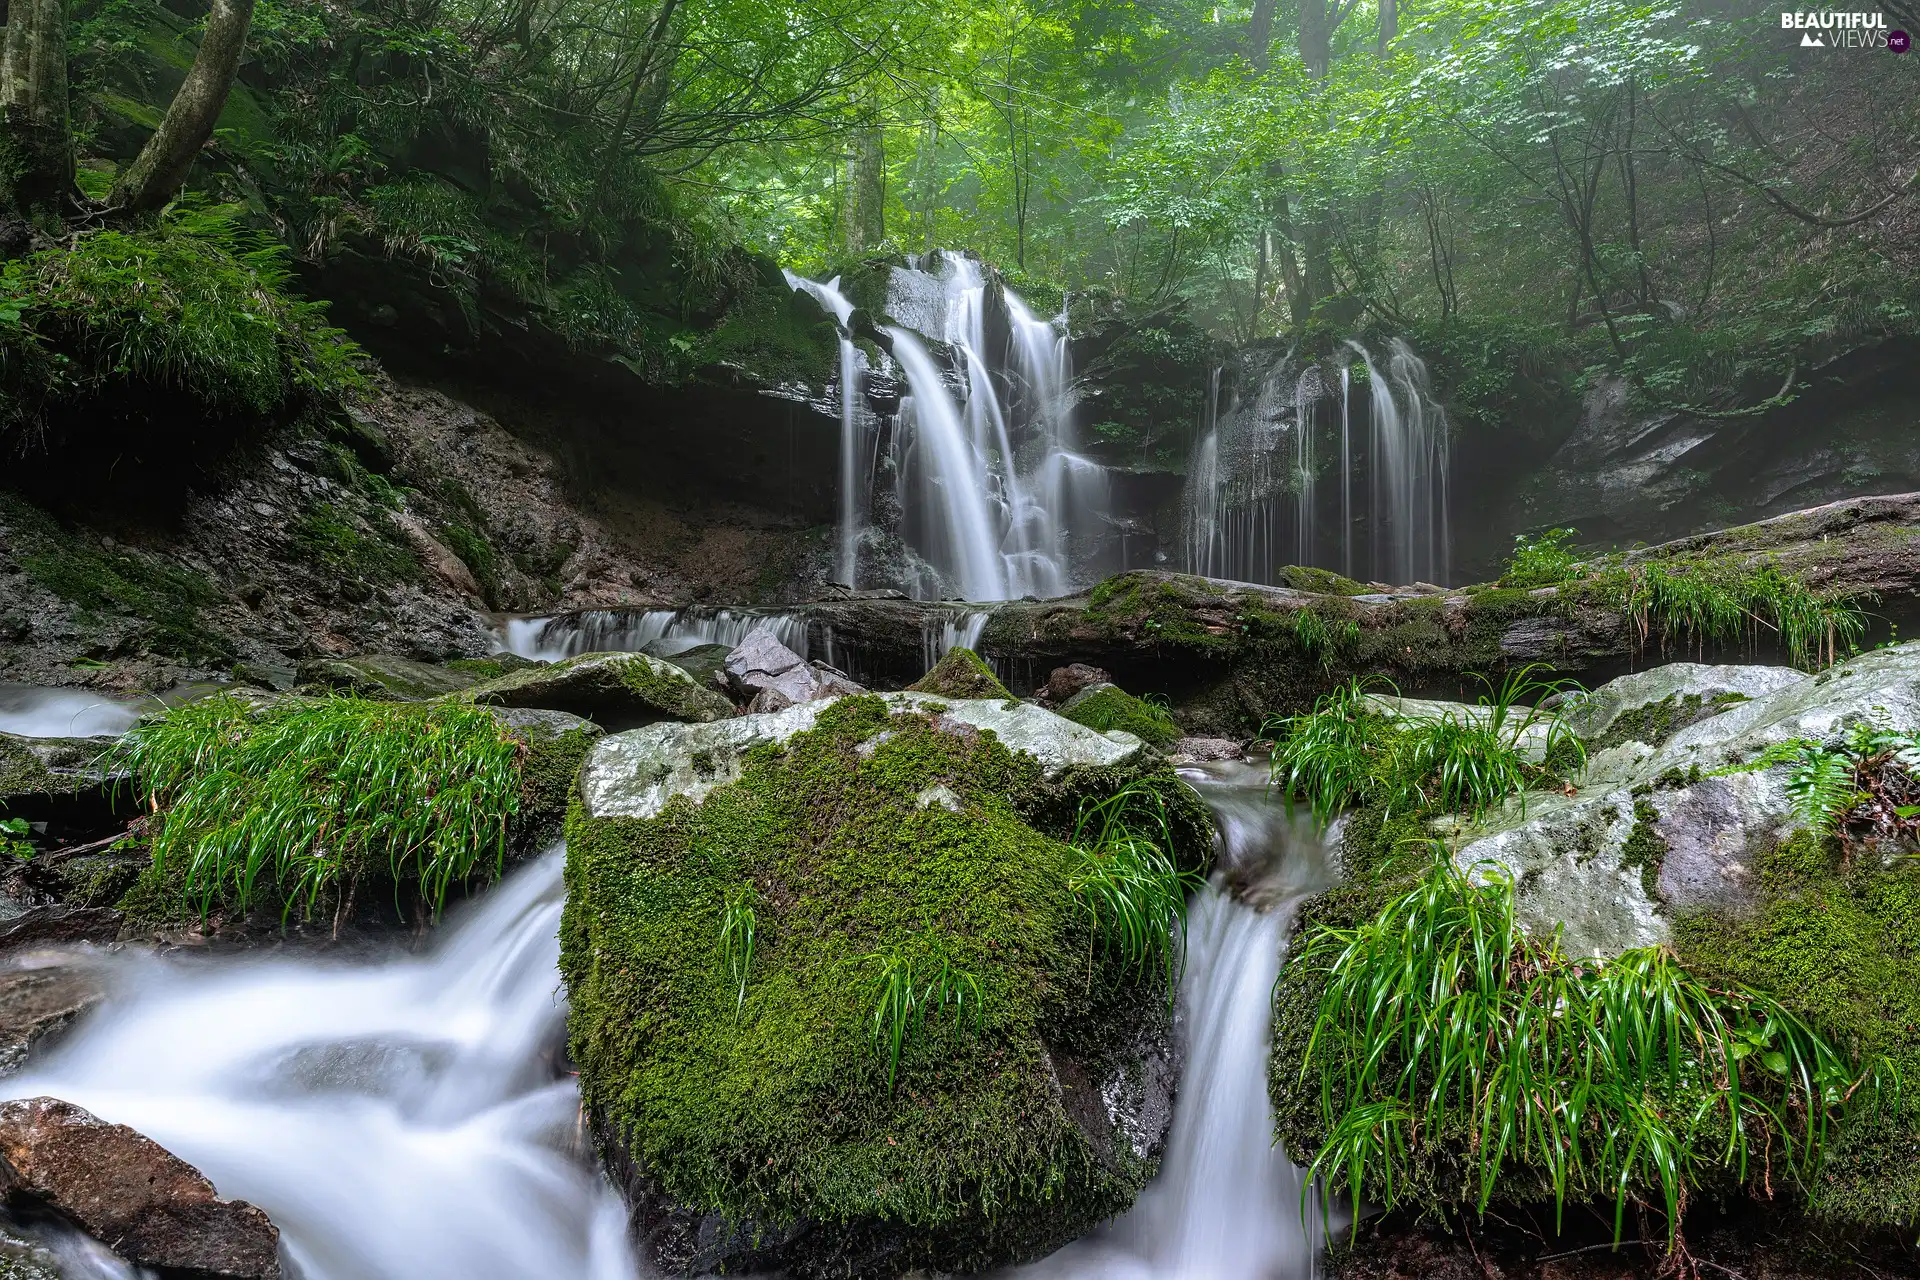 mossy, Stones, forest, VEGETATION, waterfall